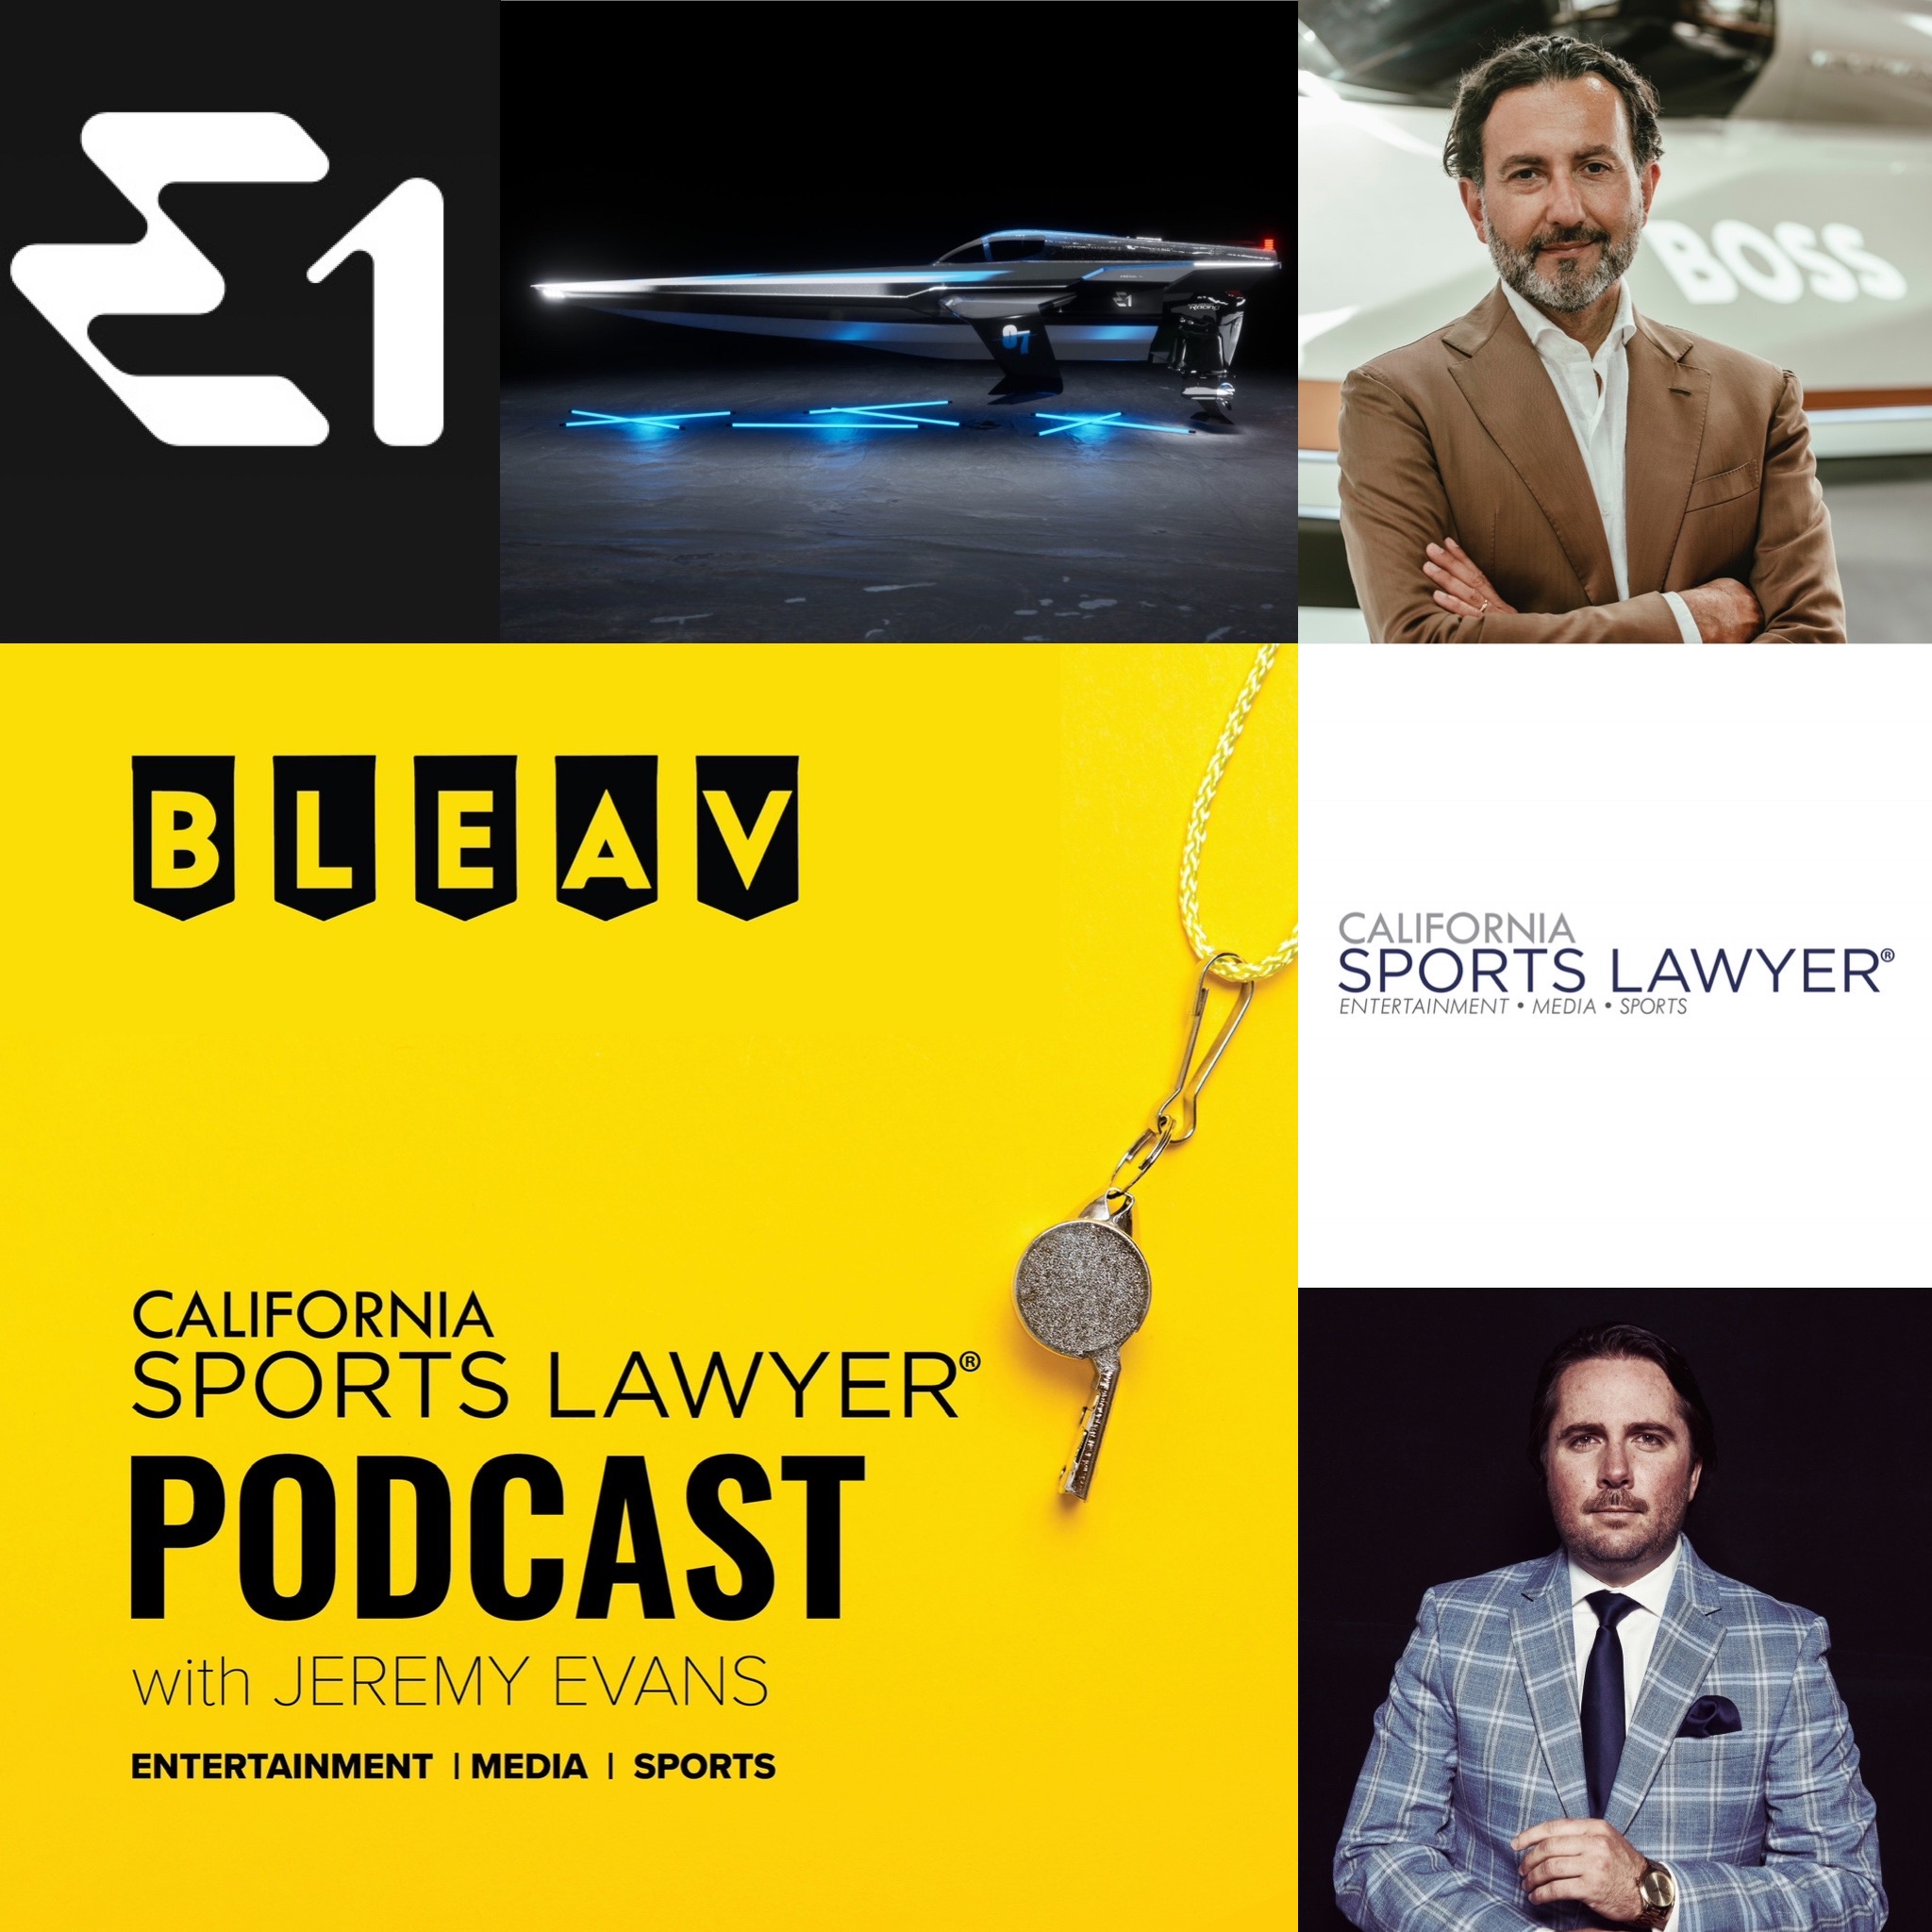 The California Sports Lawyer® Podcast with Jeremy Evans: 30+ Minutes of Fame w/ Rodi Basso, CEO and Co-Founder of E-1 (electric boat racing series)